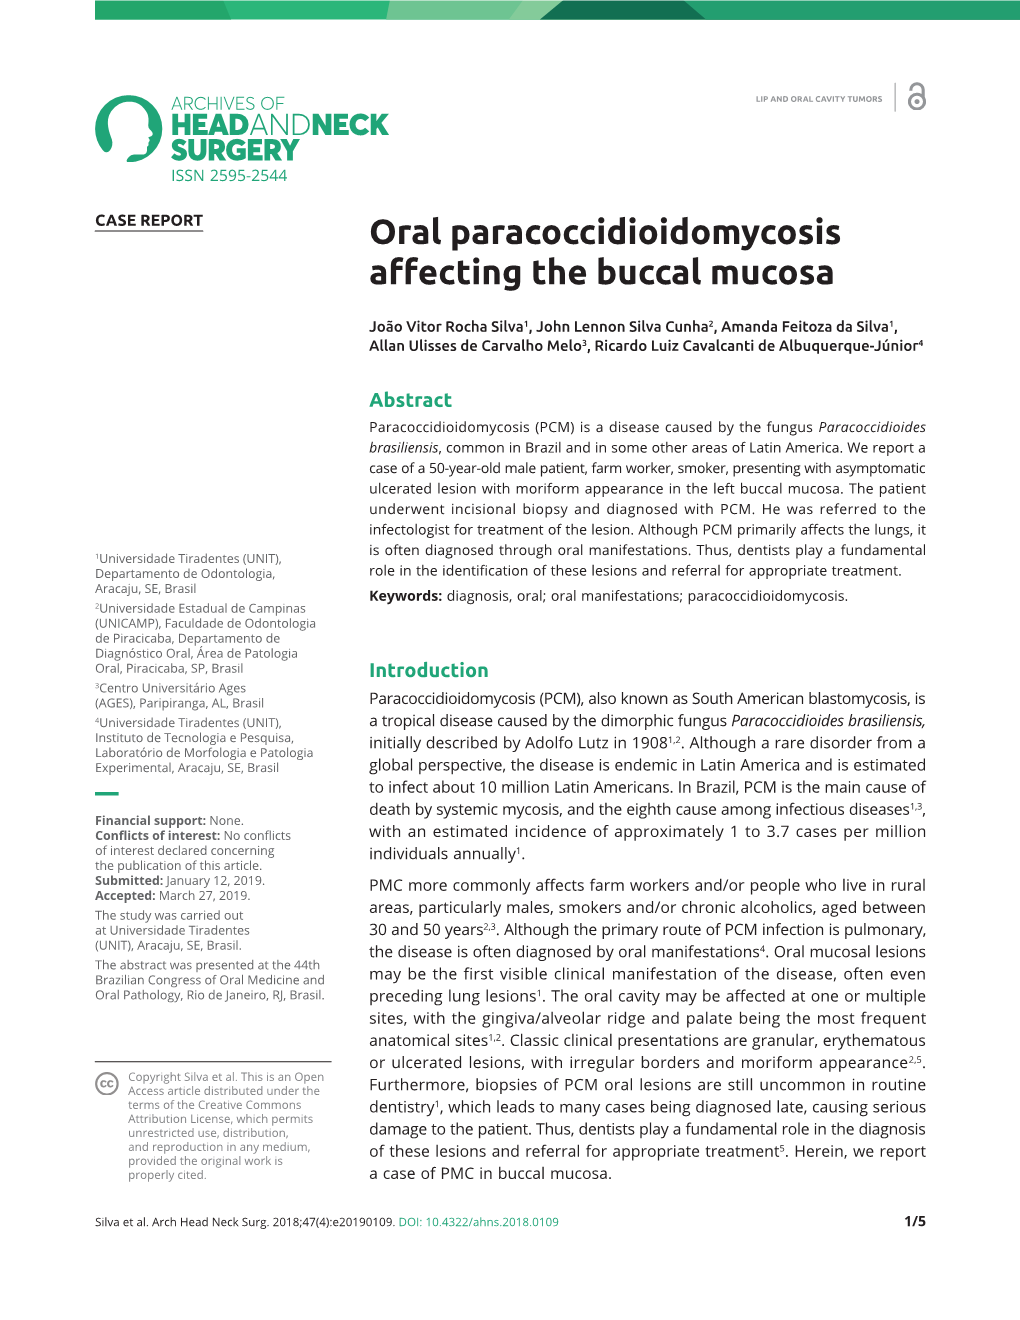 Oral Paracoccidioidomycosis Affecting the Buccal Mucosa